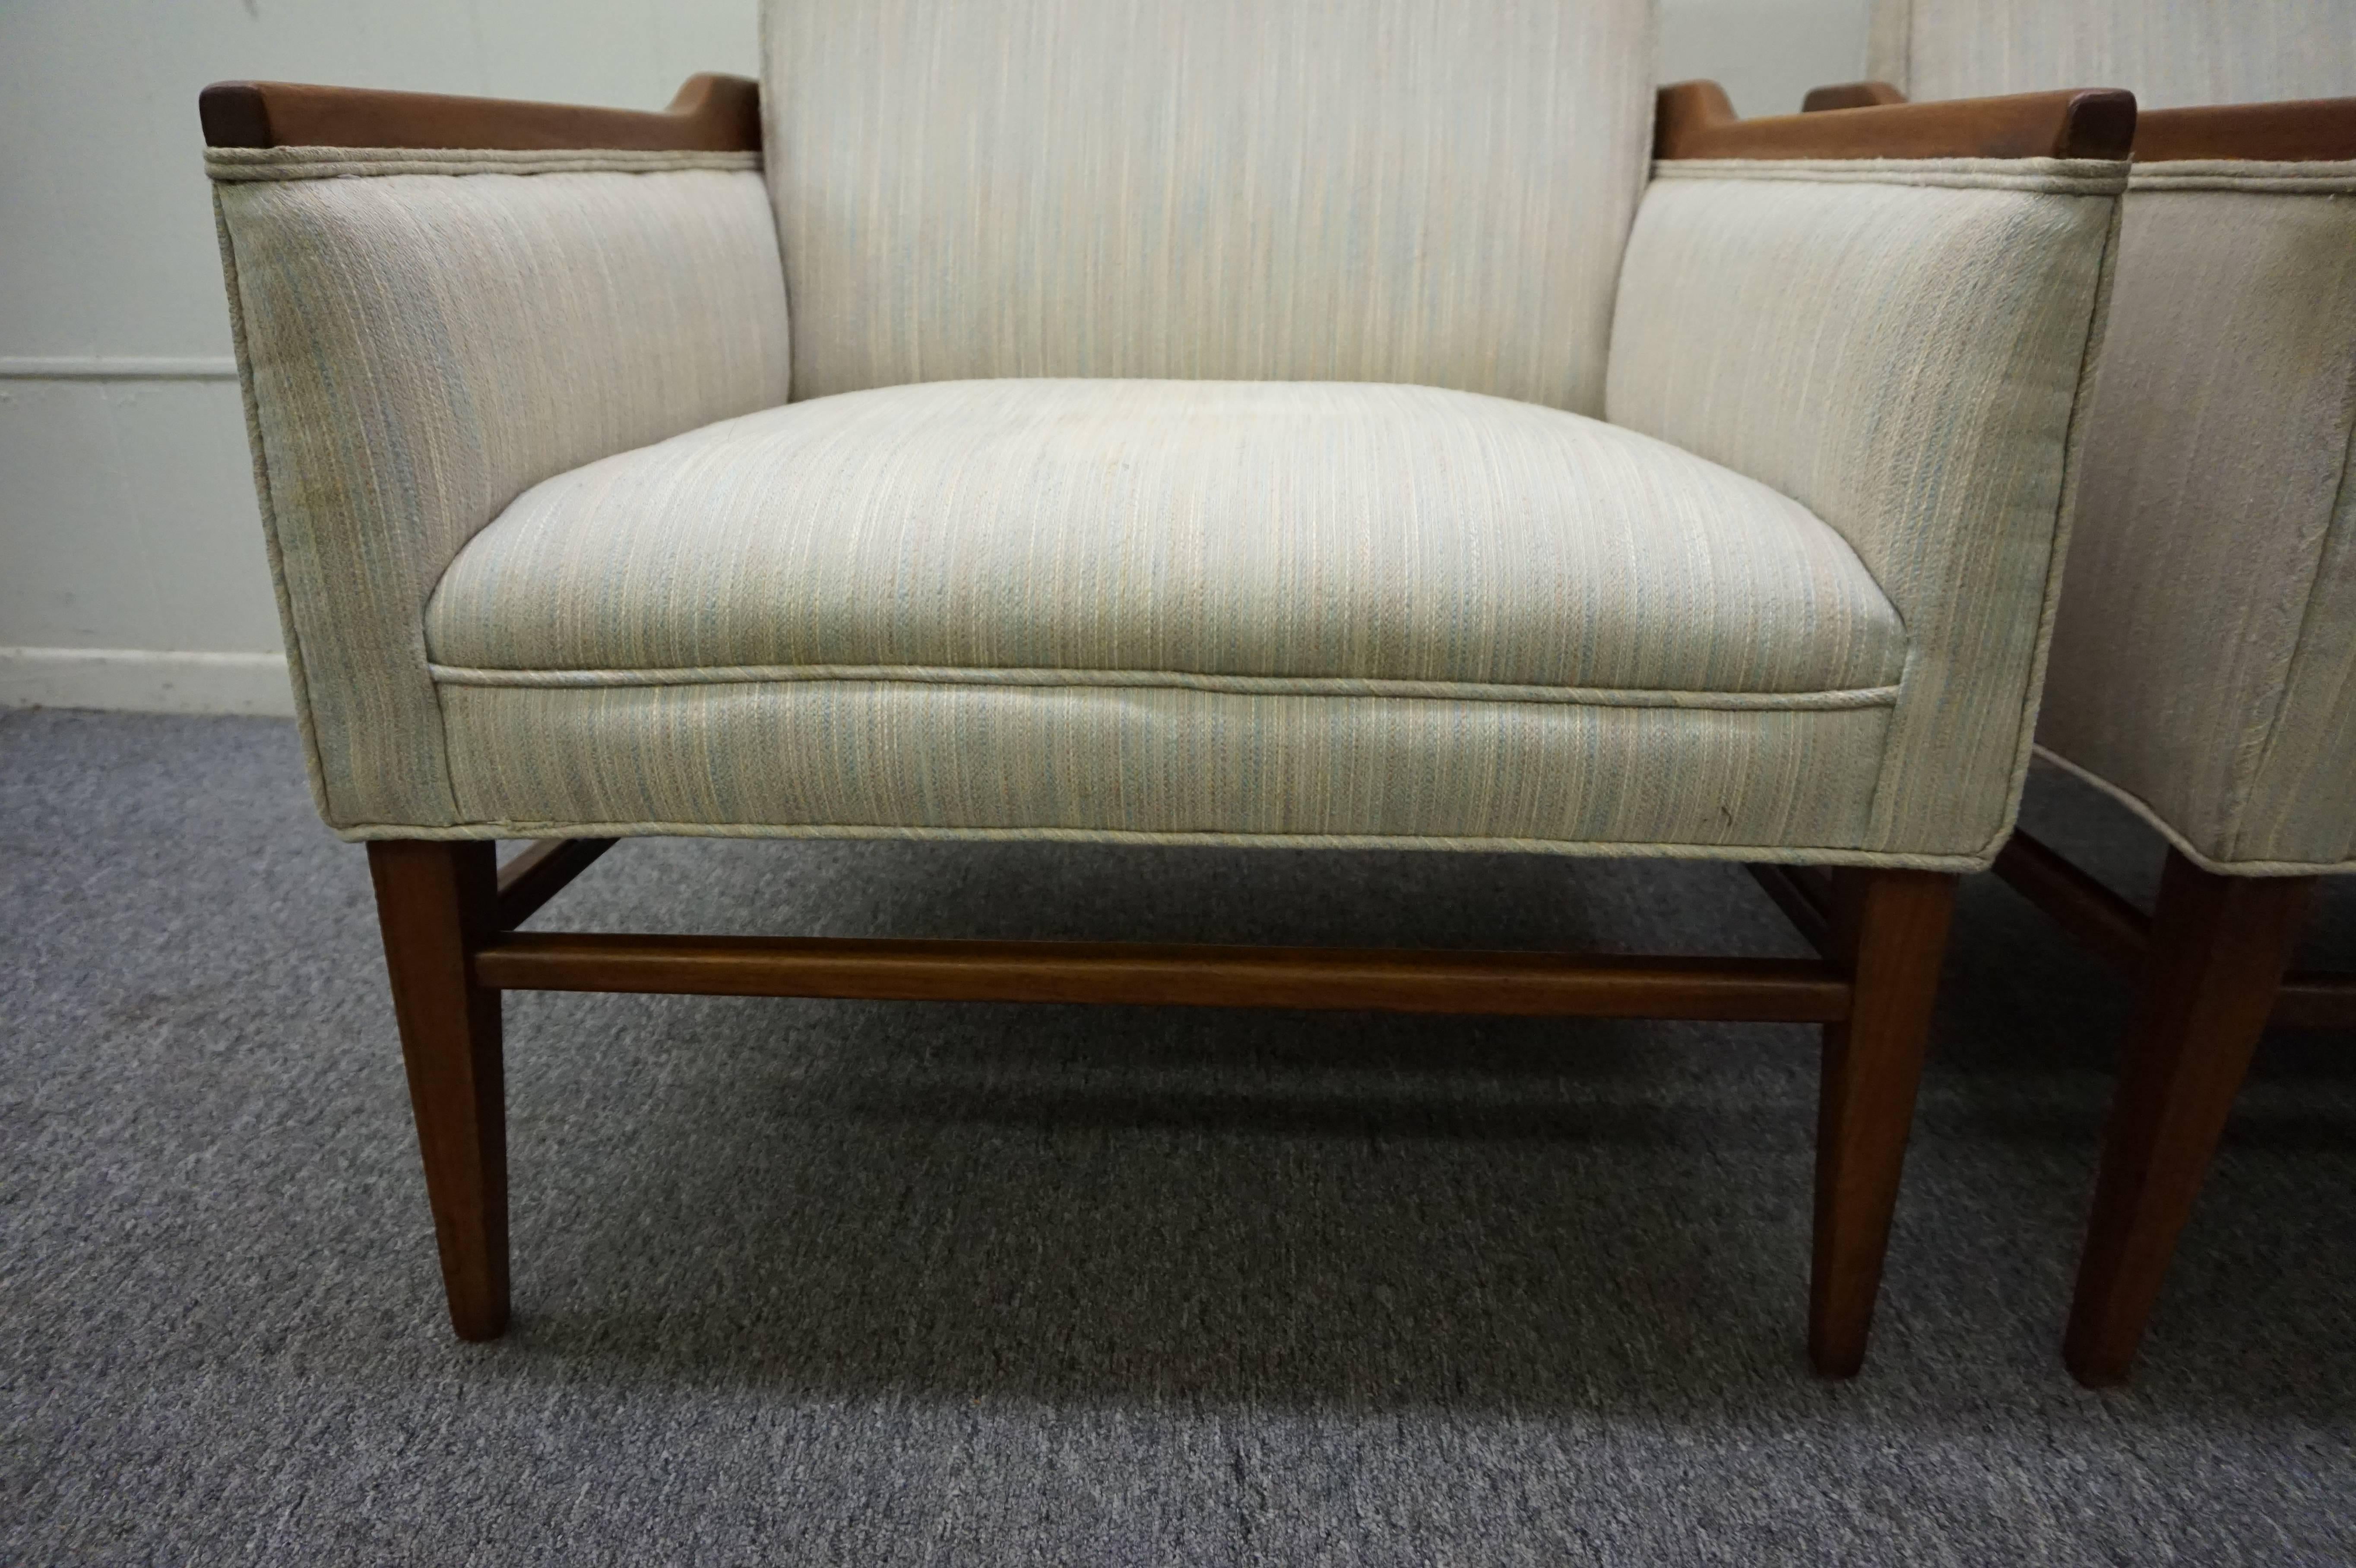 Stunning Pair of American Mid-Century Modern Walnut Lounge Chairs For Sale 4